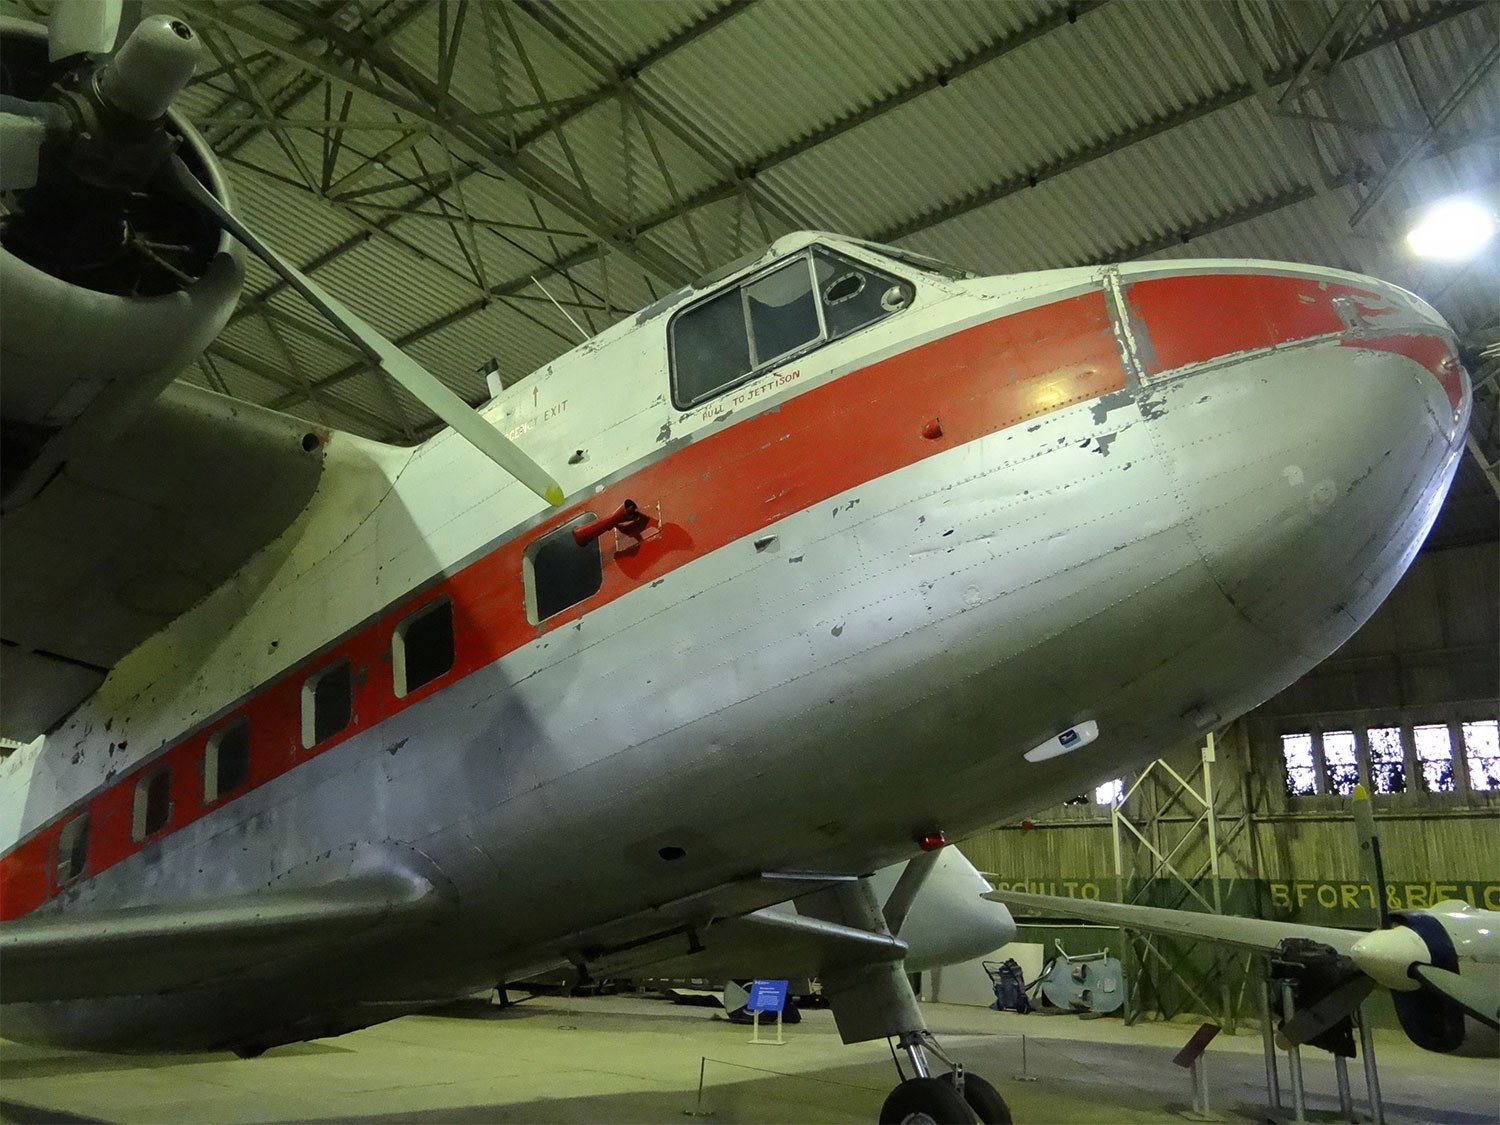 A white Scottish Aviation Twin Pioneer aircraft with a red stripe parked in a large hangar.